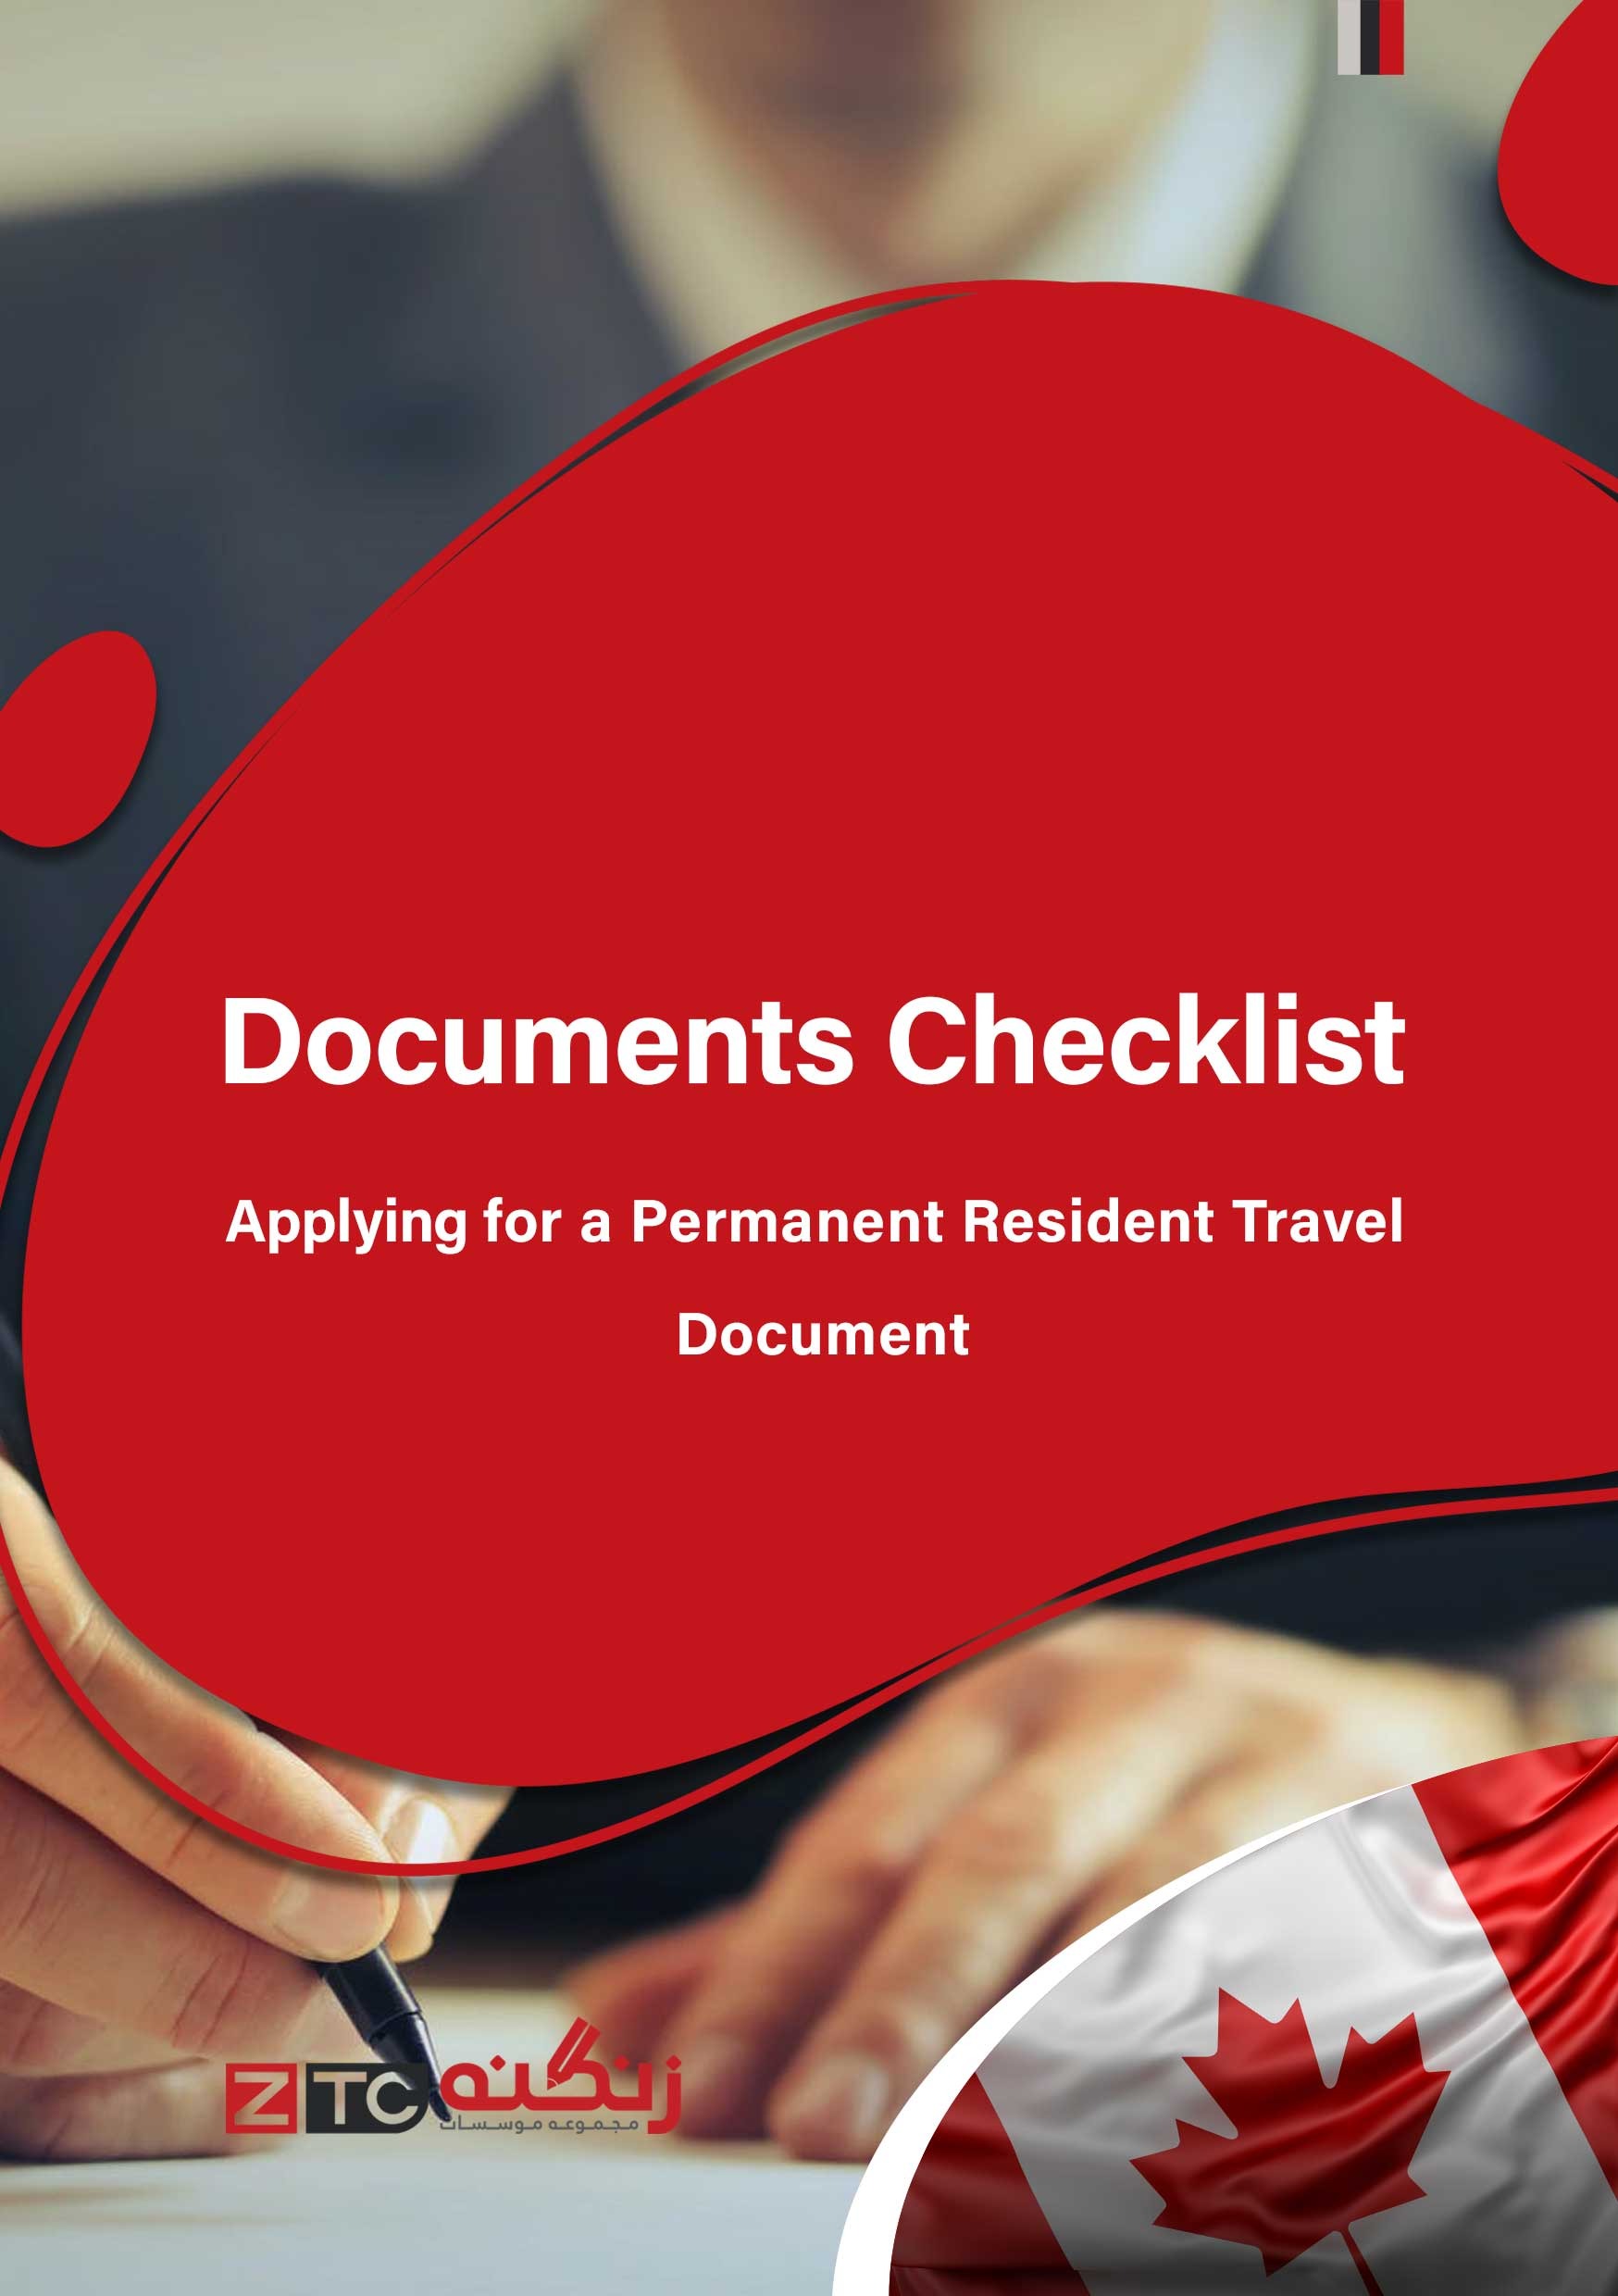 Documents Checklist - Applying for a Permanent Resident Travel Document